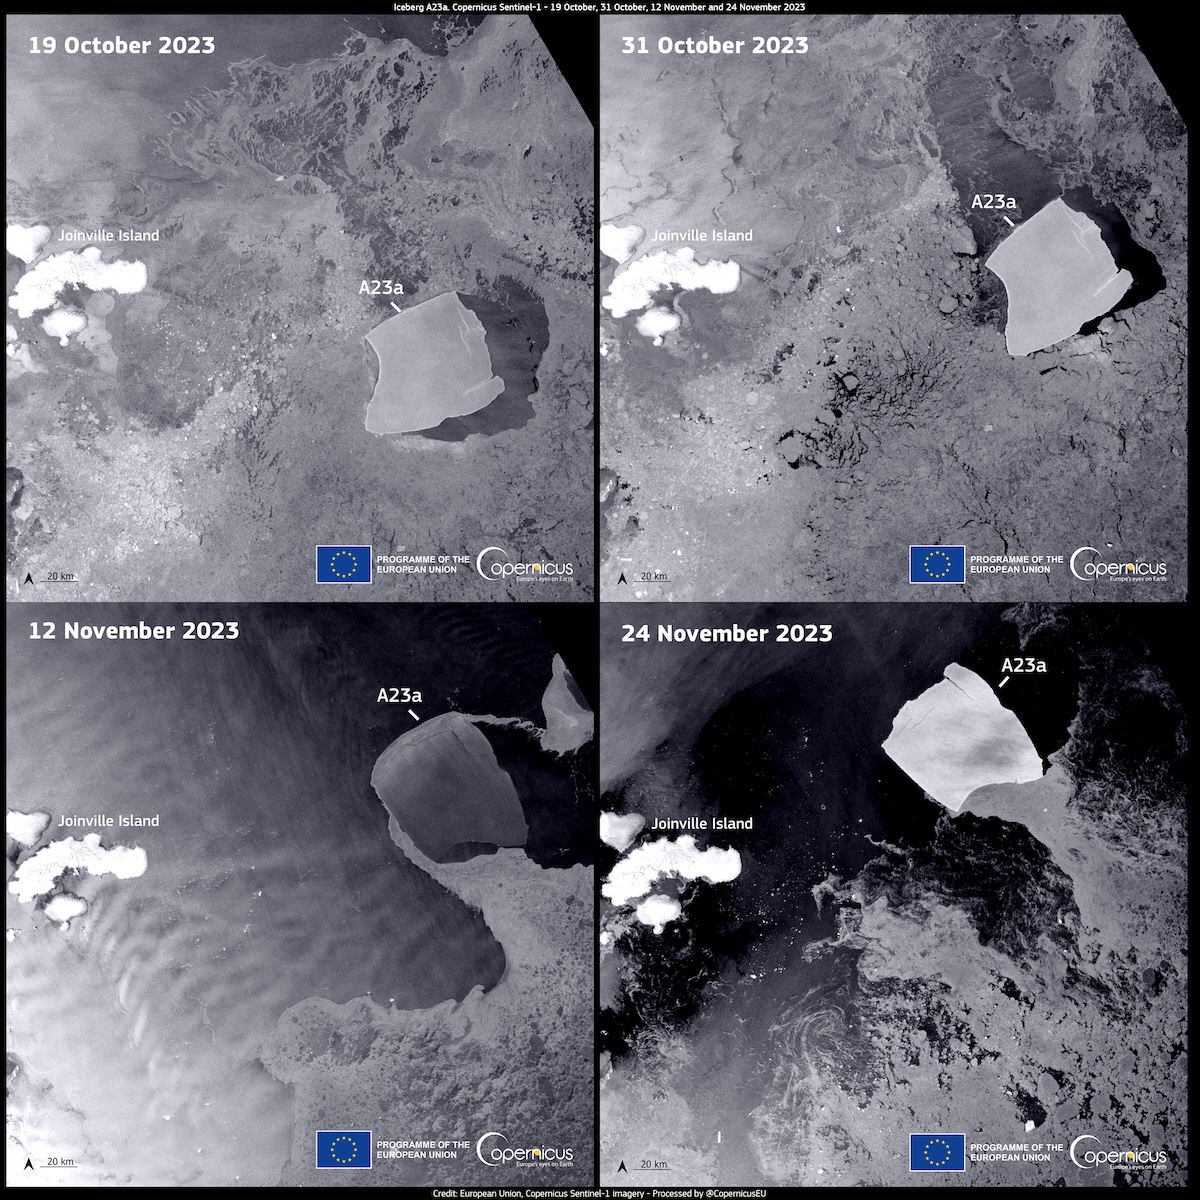 Radar images acquired by the Copernicus Sentinel-1A satellite show the iceberg A23a moving near Joinville Island in Antarctica